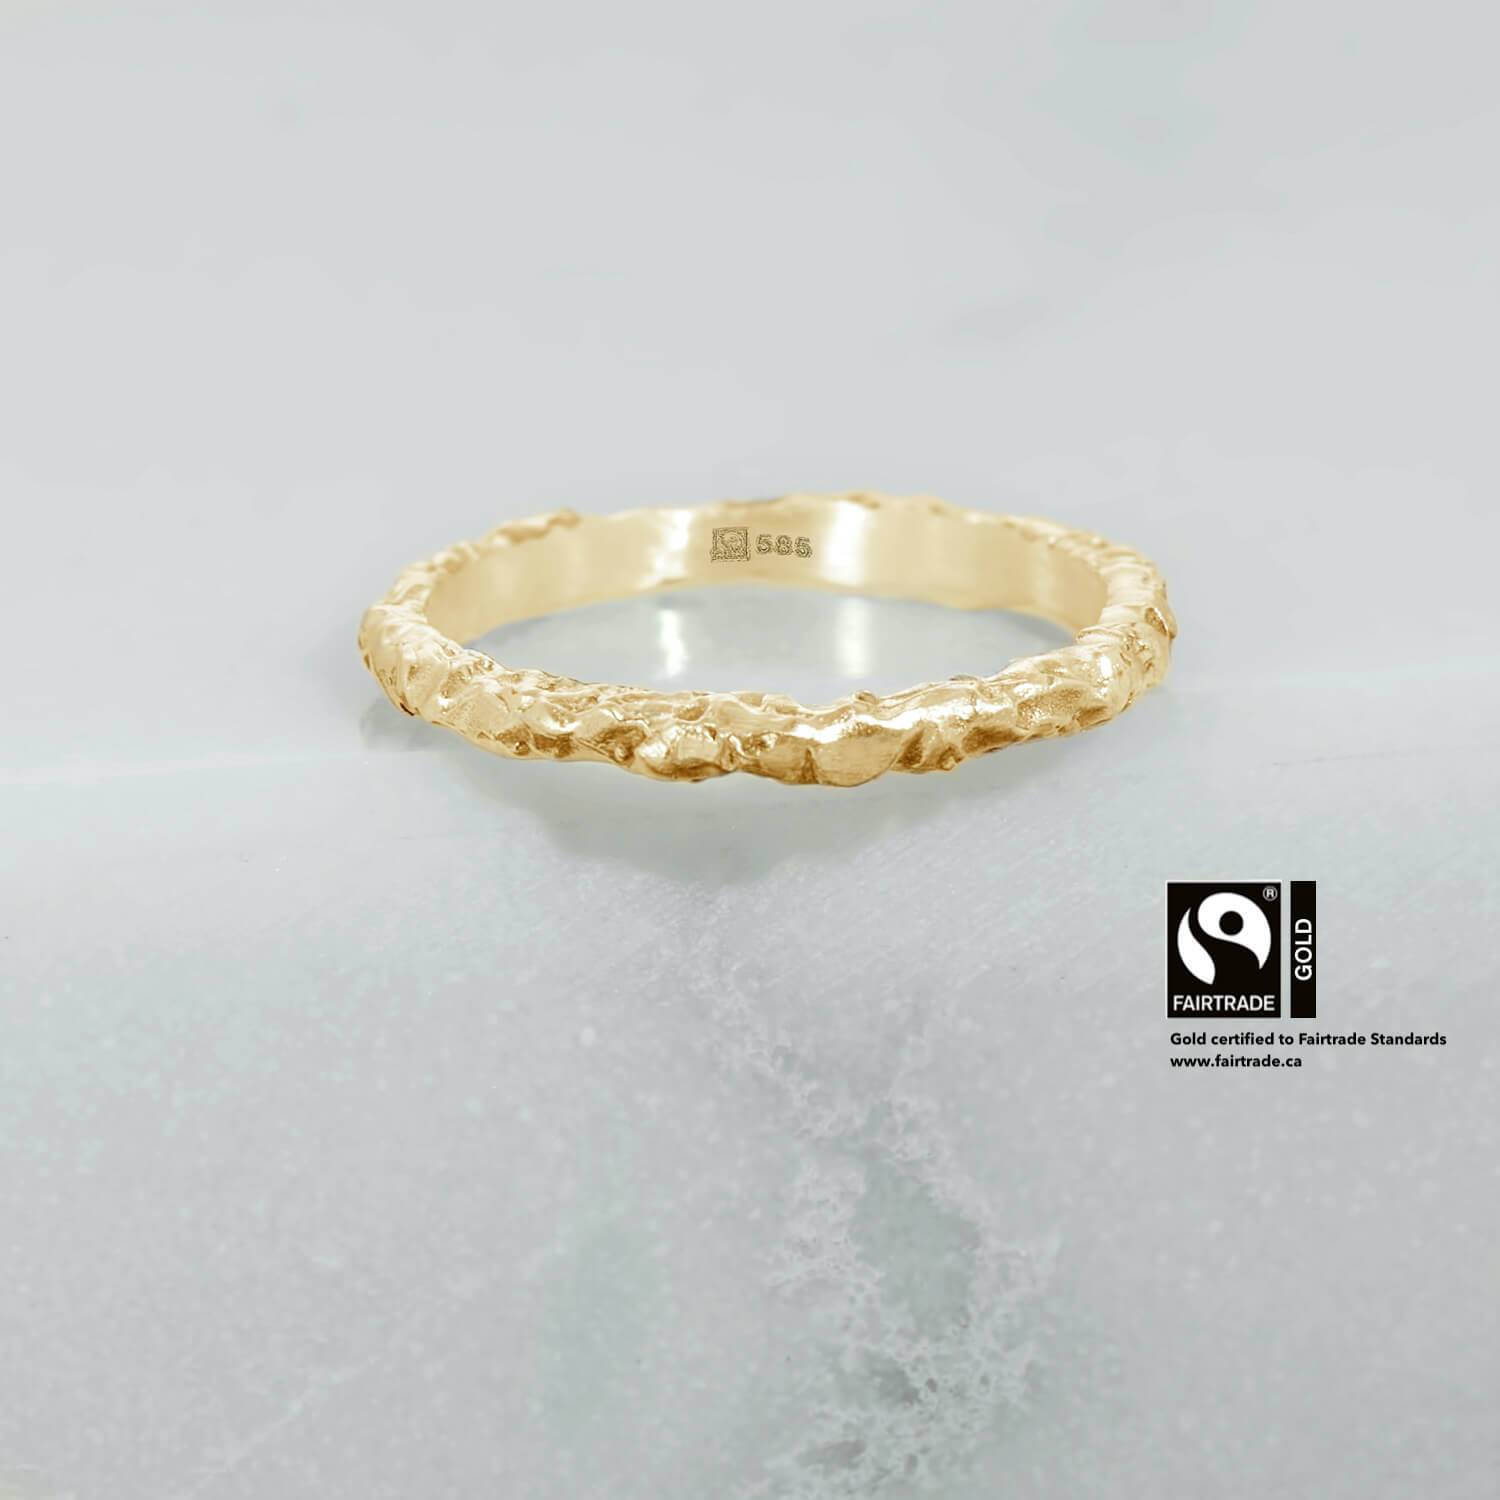 This ring is handcrafted using 14 karat yellow Fairtrade Certified gold. It has concave, carved features along the profile with a satin finish. The ring measures 1.5mm in its width & 1.3mm in its thickness.